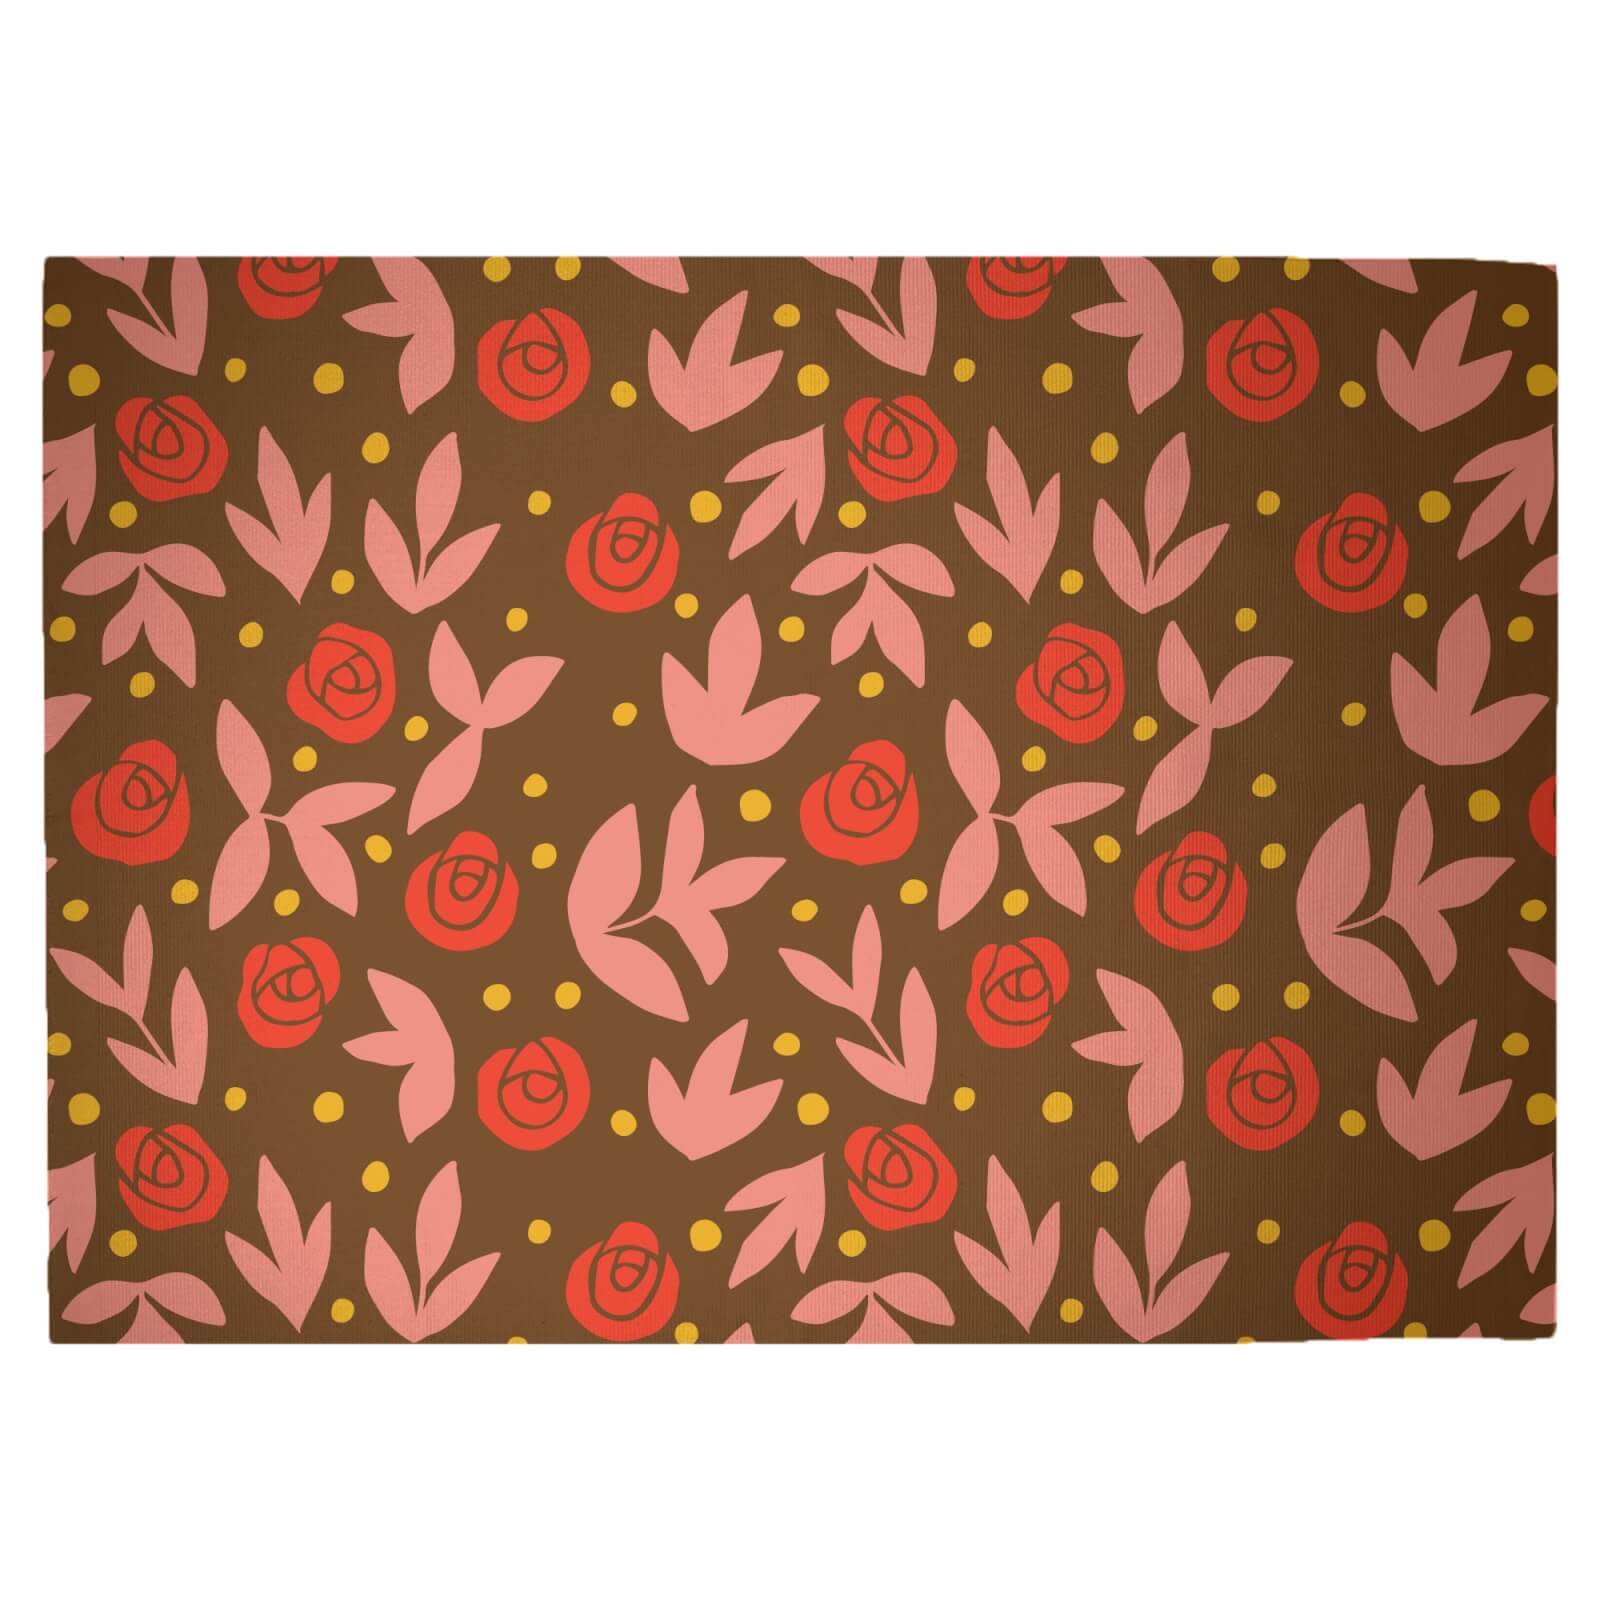 Retro Roses Woven Rug - Large